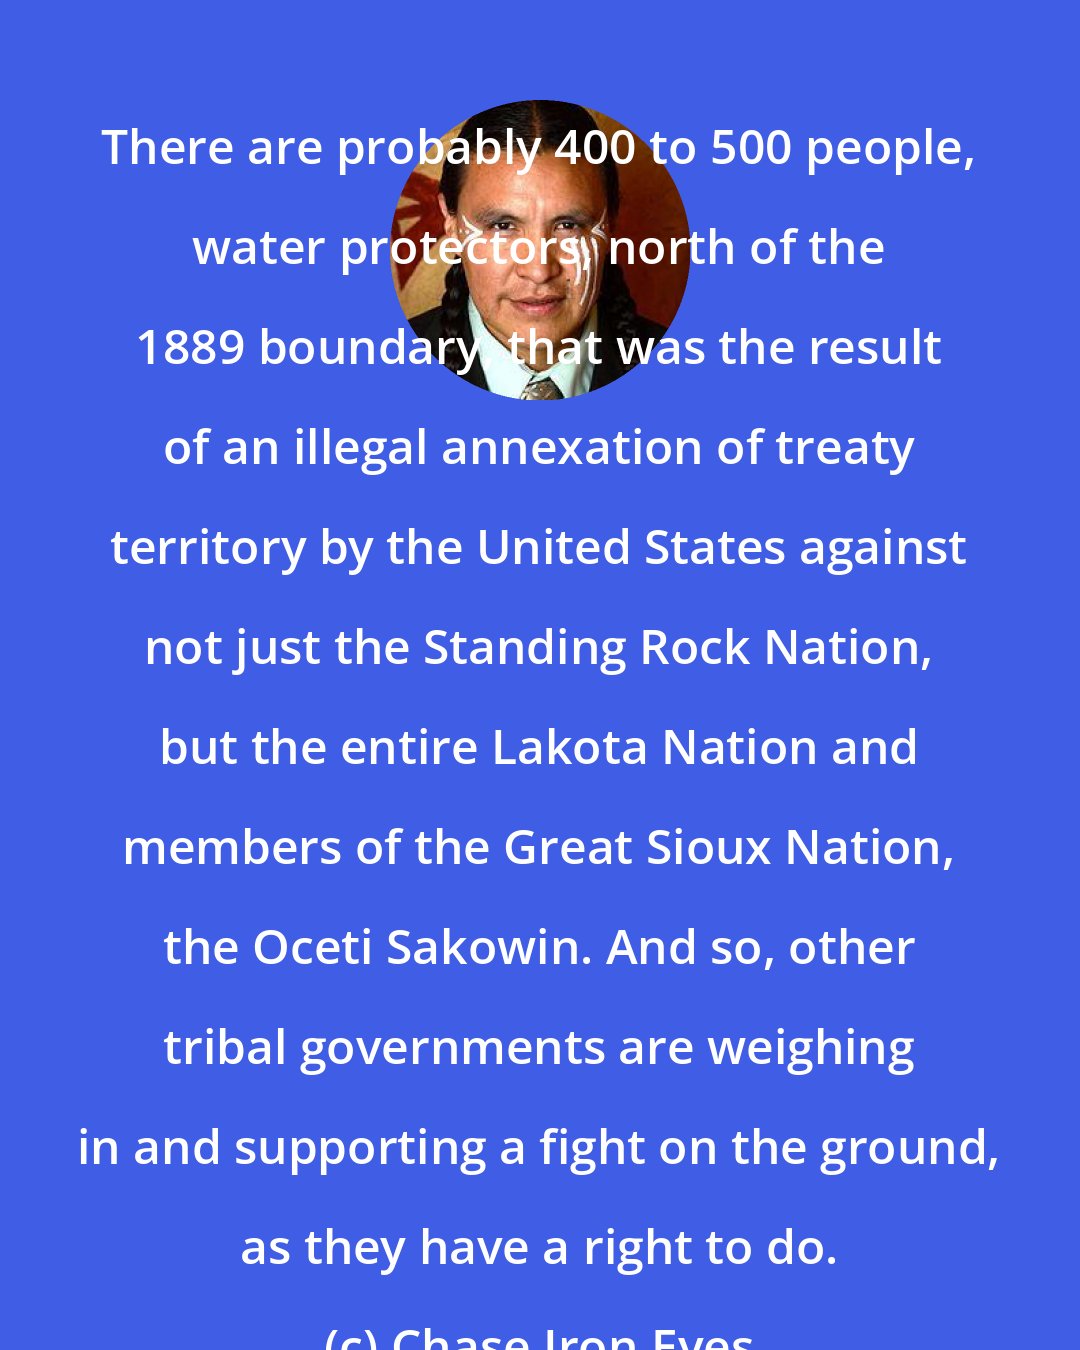 Chase Iron Eyes: There are probably 400 to 500 people, water protectors, north of the 1889 boundary, that was the result of an illegal annexation of treaty territory by the United States against not just the Standing Rock Nation, but the entire Lakota Nation and members of the Great Sioux Nation, the Oceti Sakowin. And so, other tribal governments are weighing in and supporting a fight on the ground, as they have a right to do.